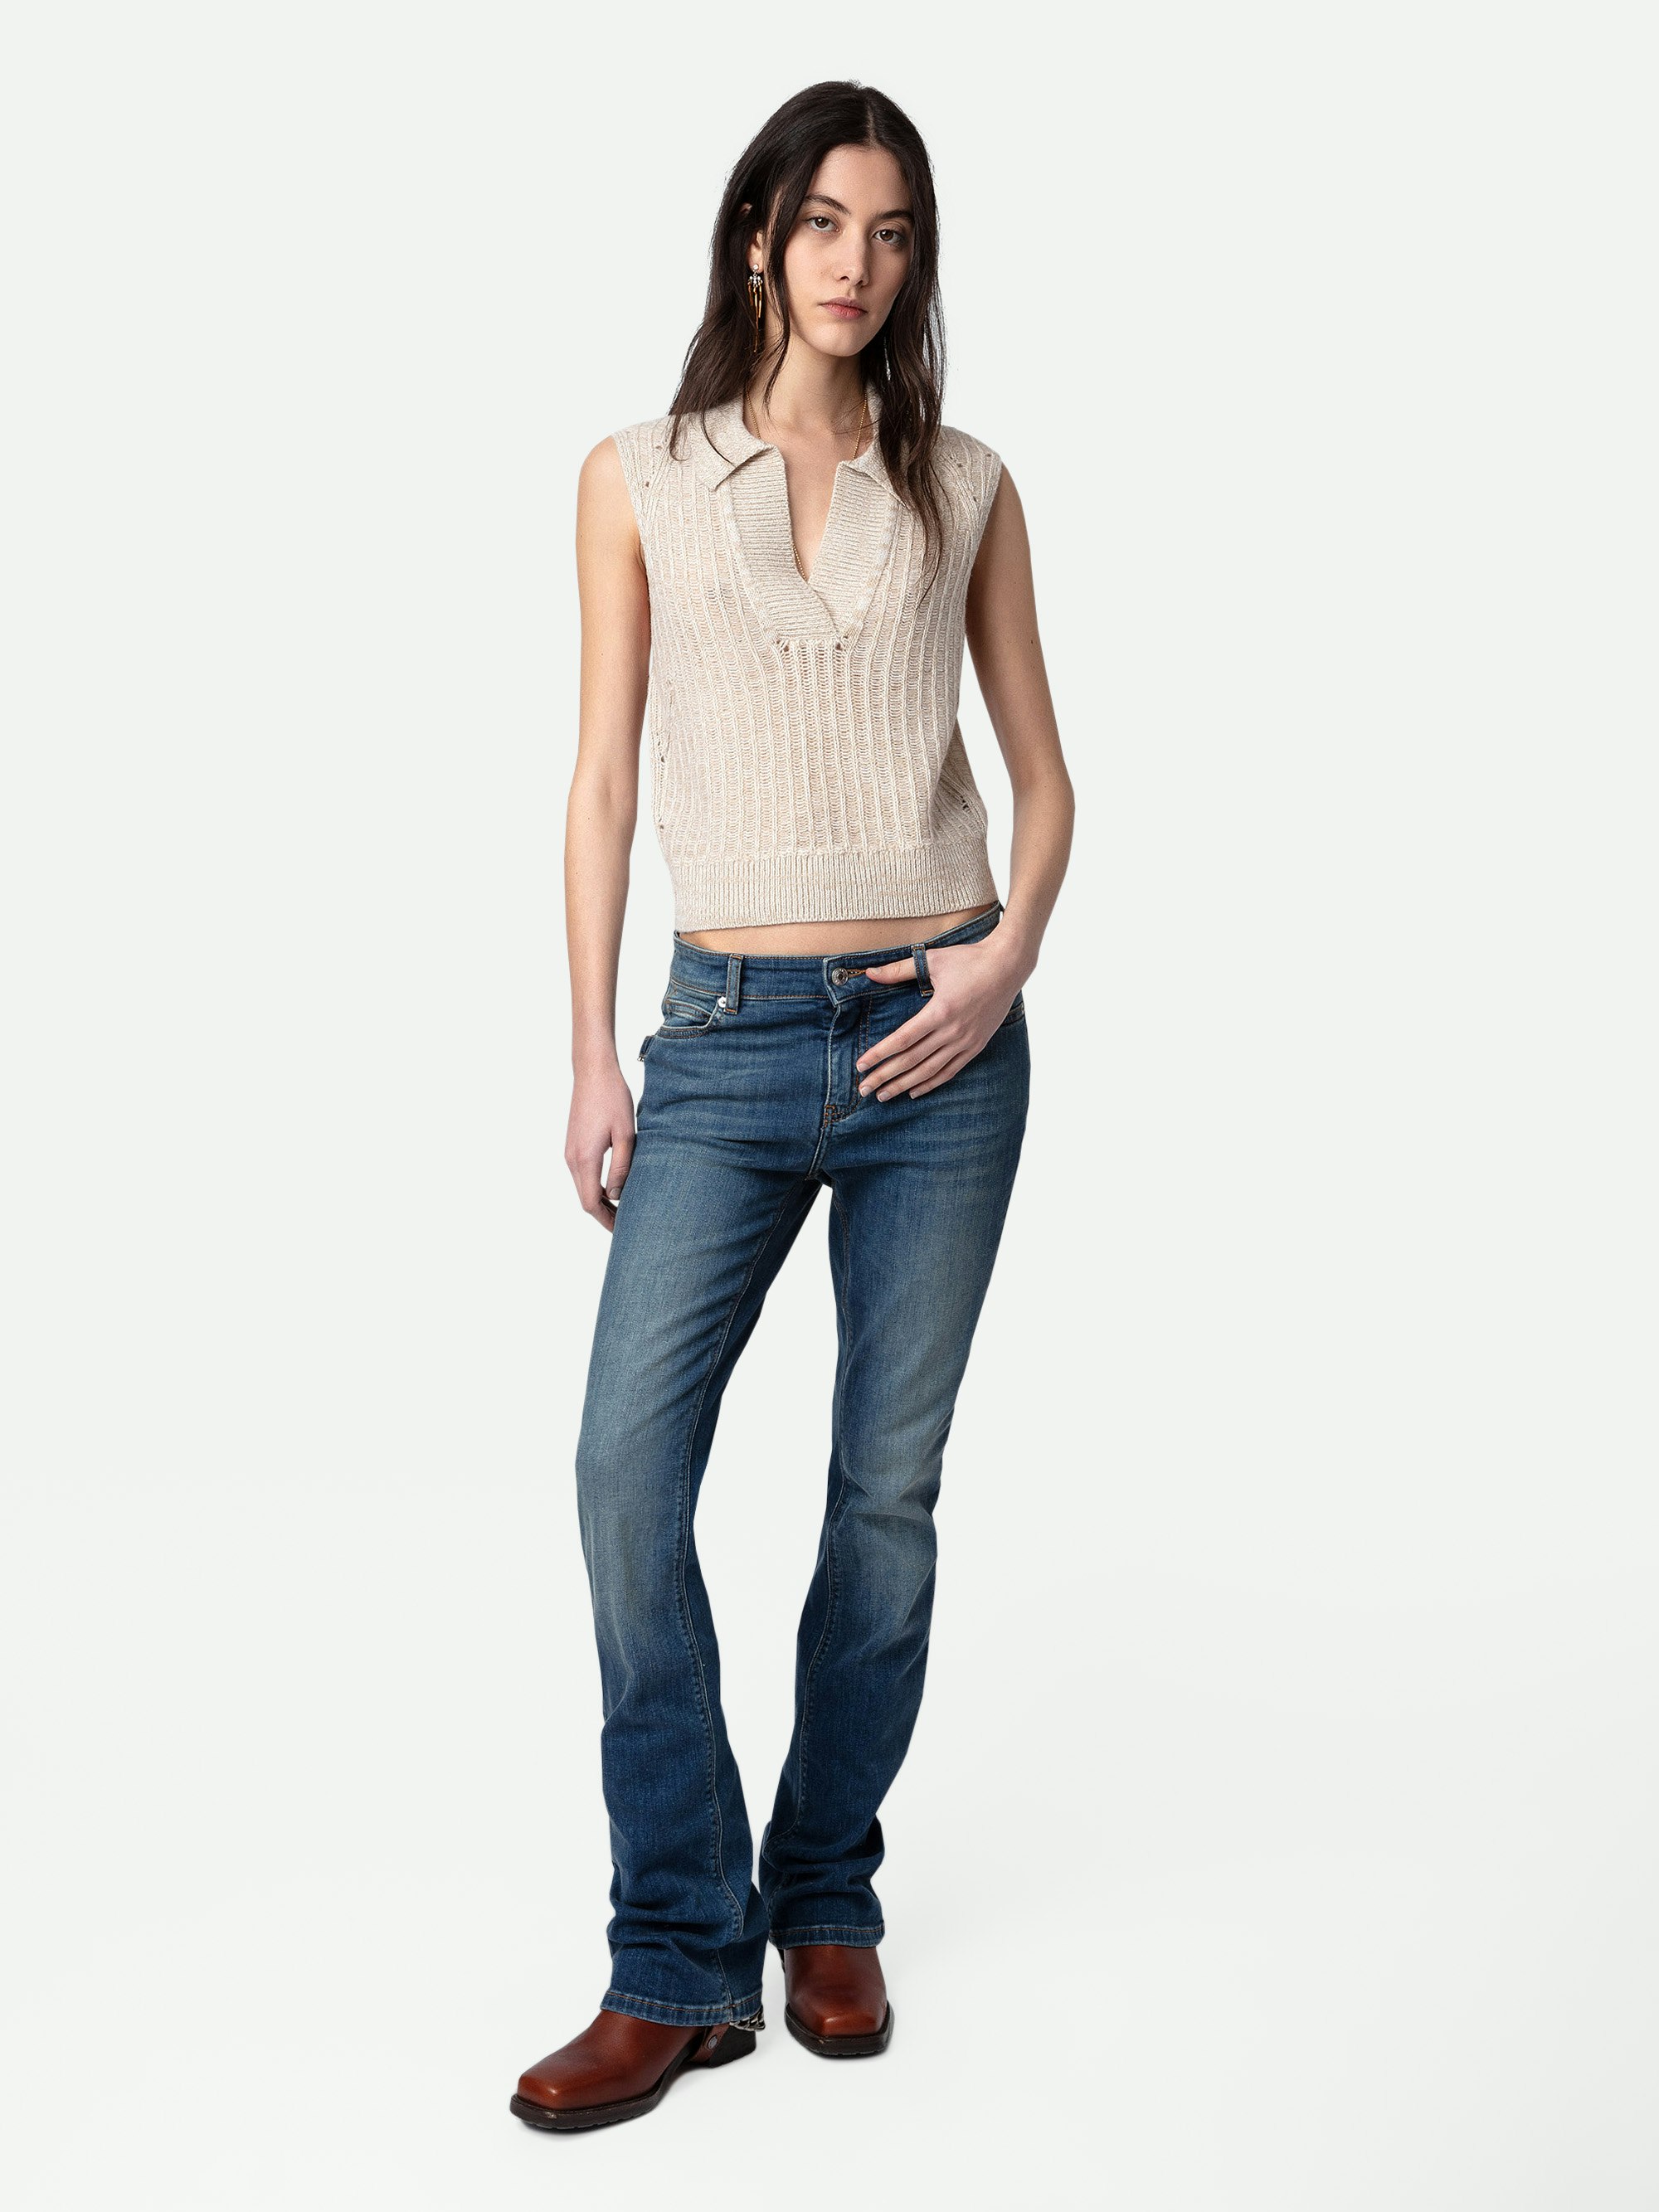 Lunny Sweater - Ecru merino wool cropped sleeveless sweater with openwork details and open V neckline.